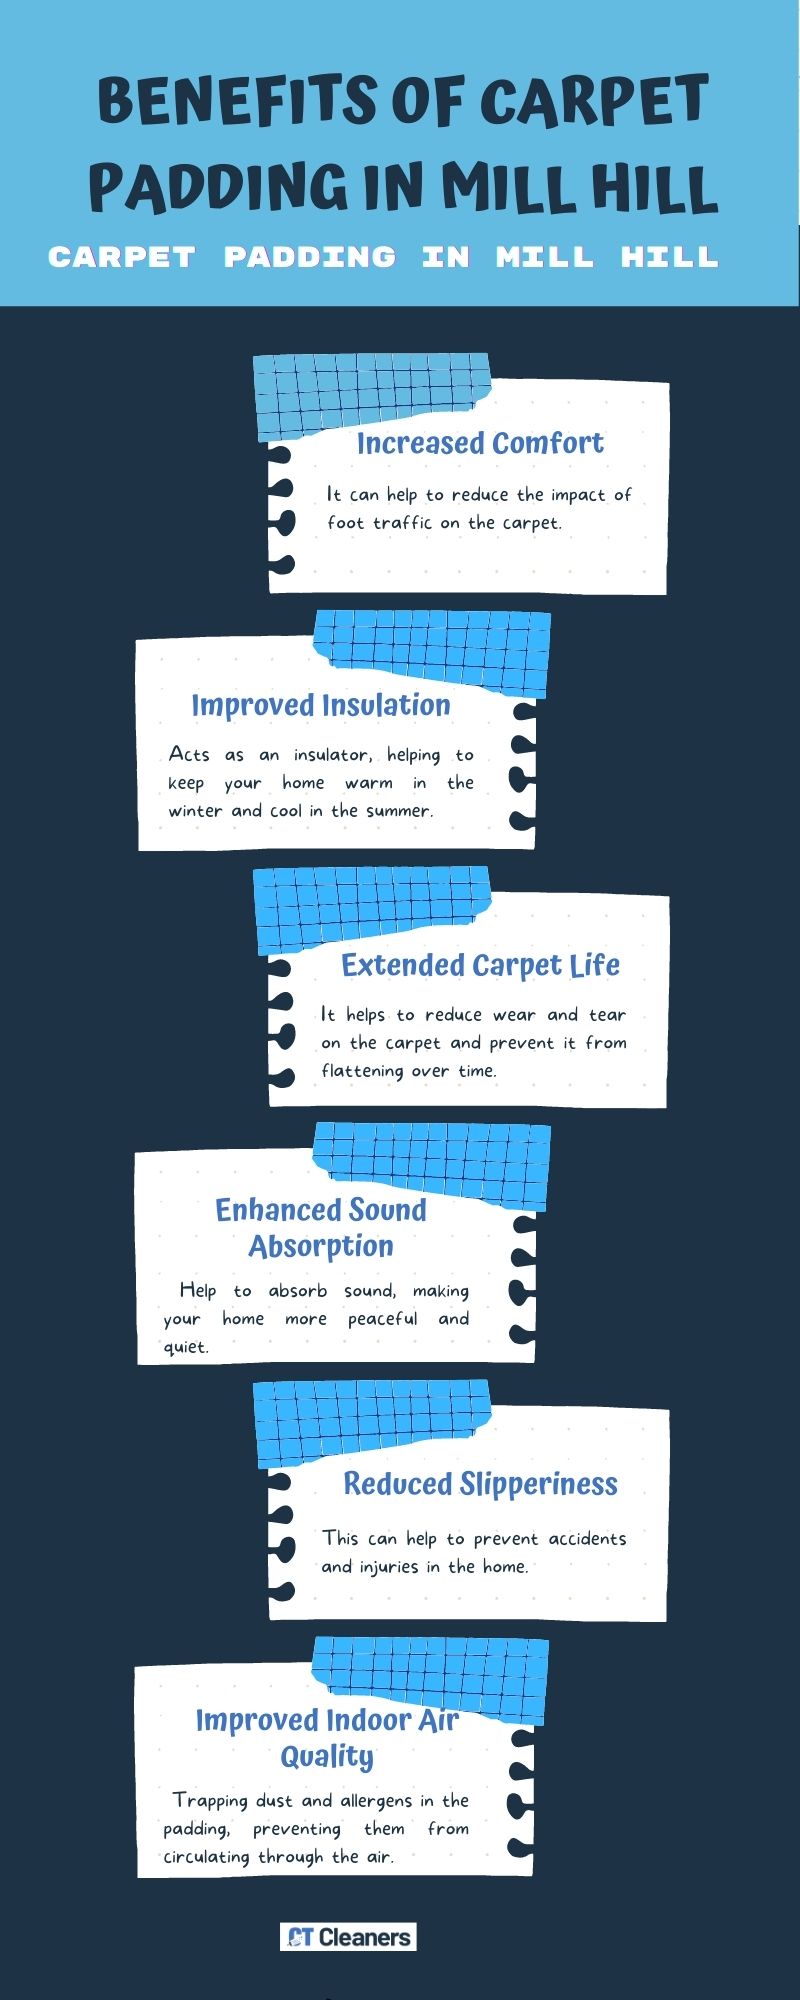 Benefits of Carpet Padding in Mill Hill